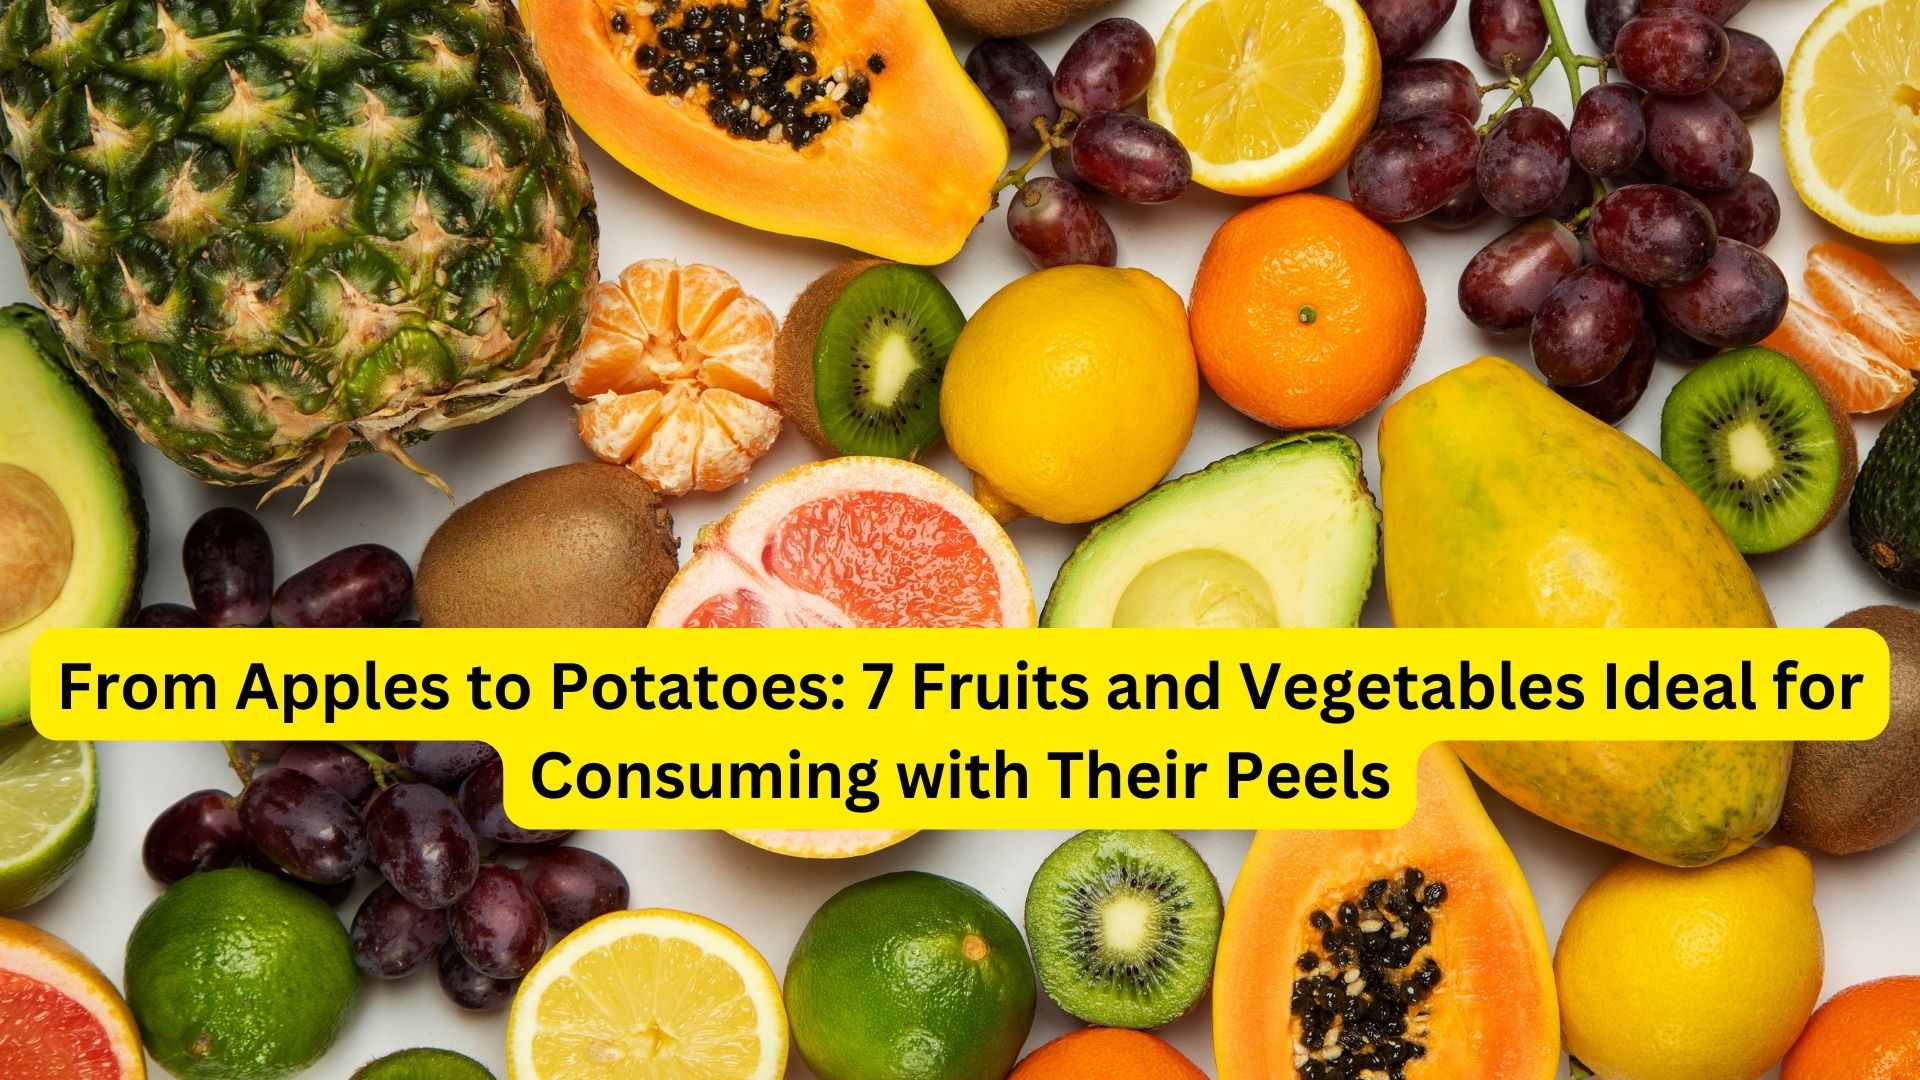 From Apples to Potatoes: 7 Fruits and Vegetables Ideal for Consuming with Their Peels